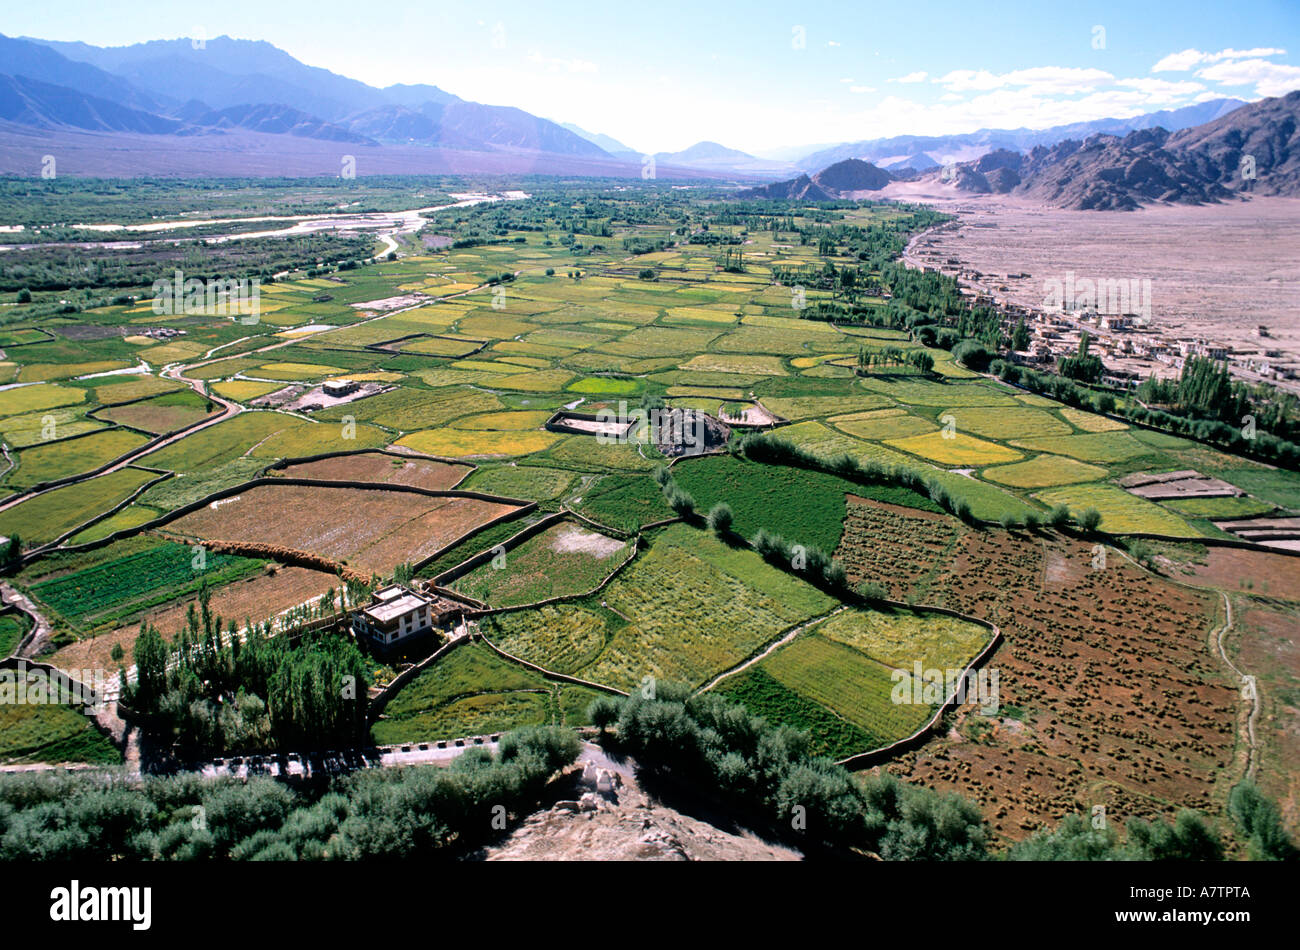 India, Jammu and Kashmir State, Ladakh region, Thiksey, cultivation along the Indus river Stock Photo